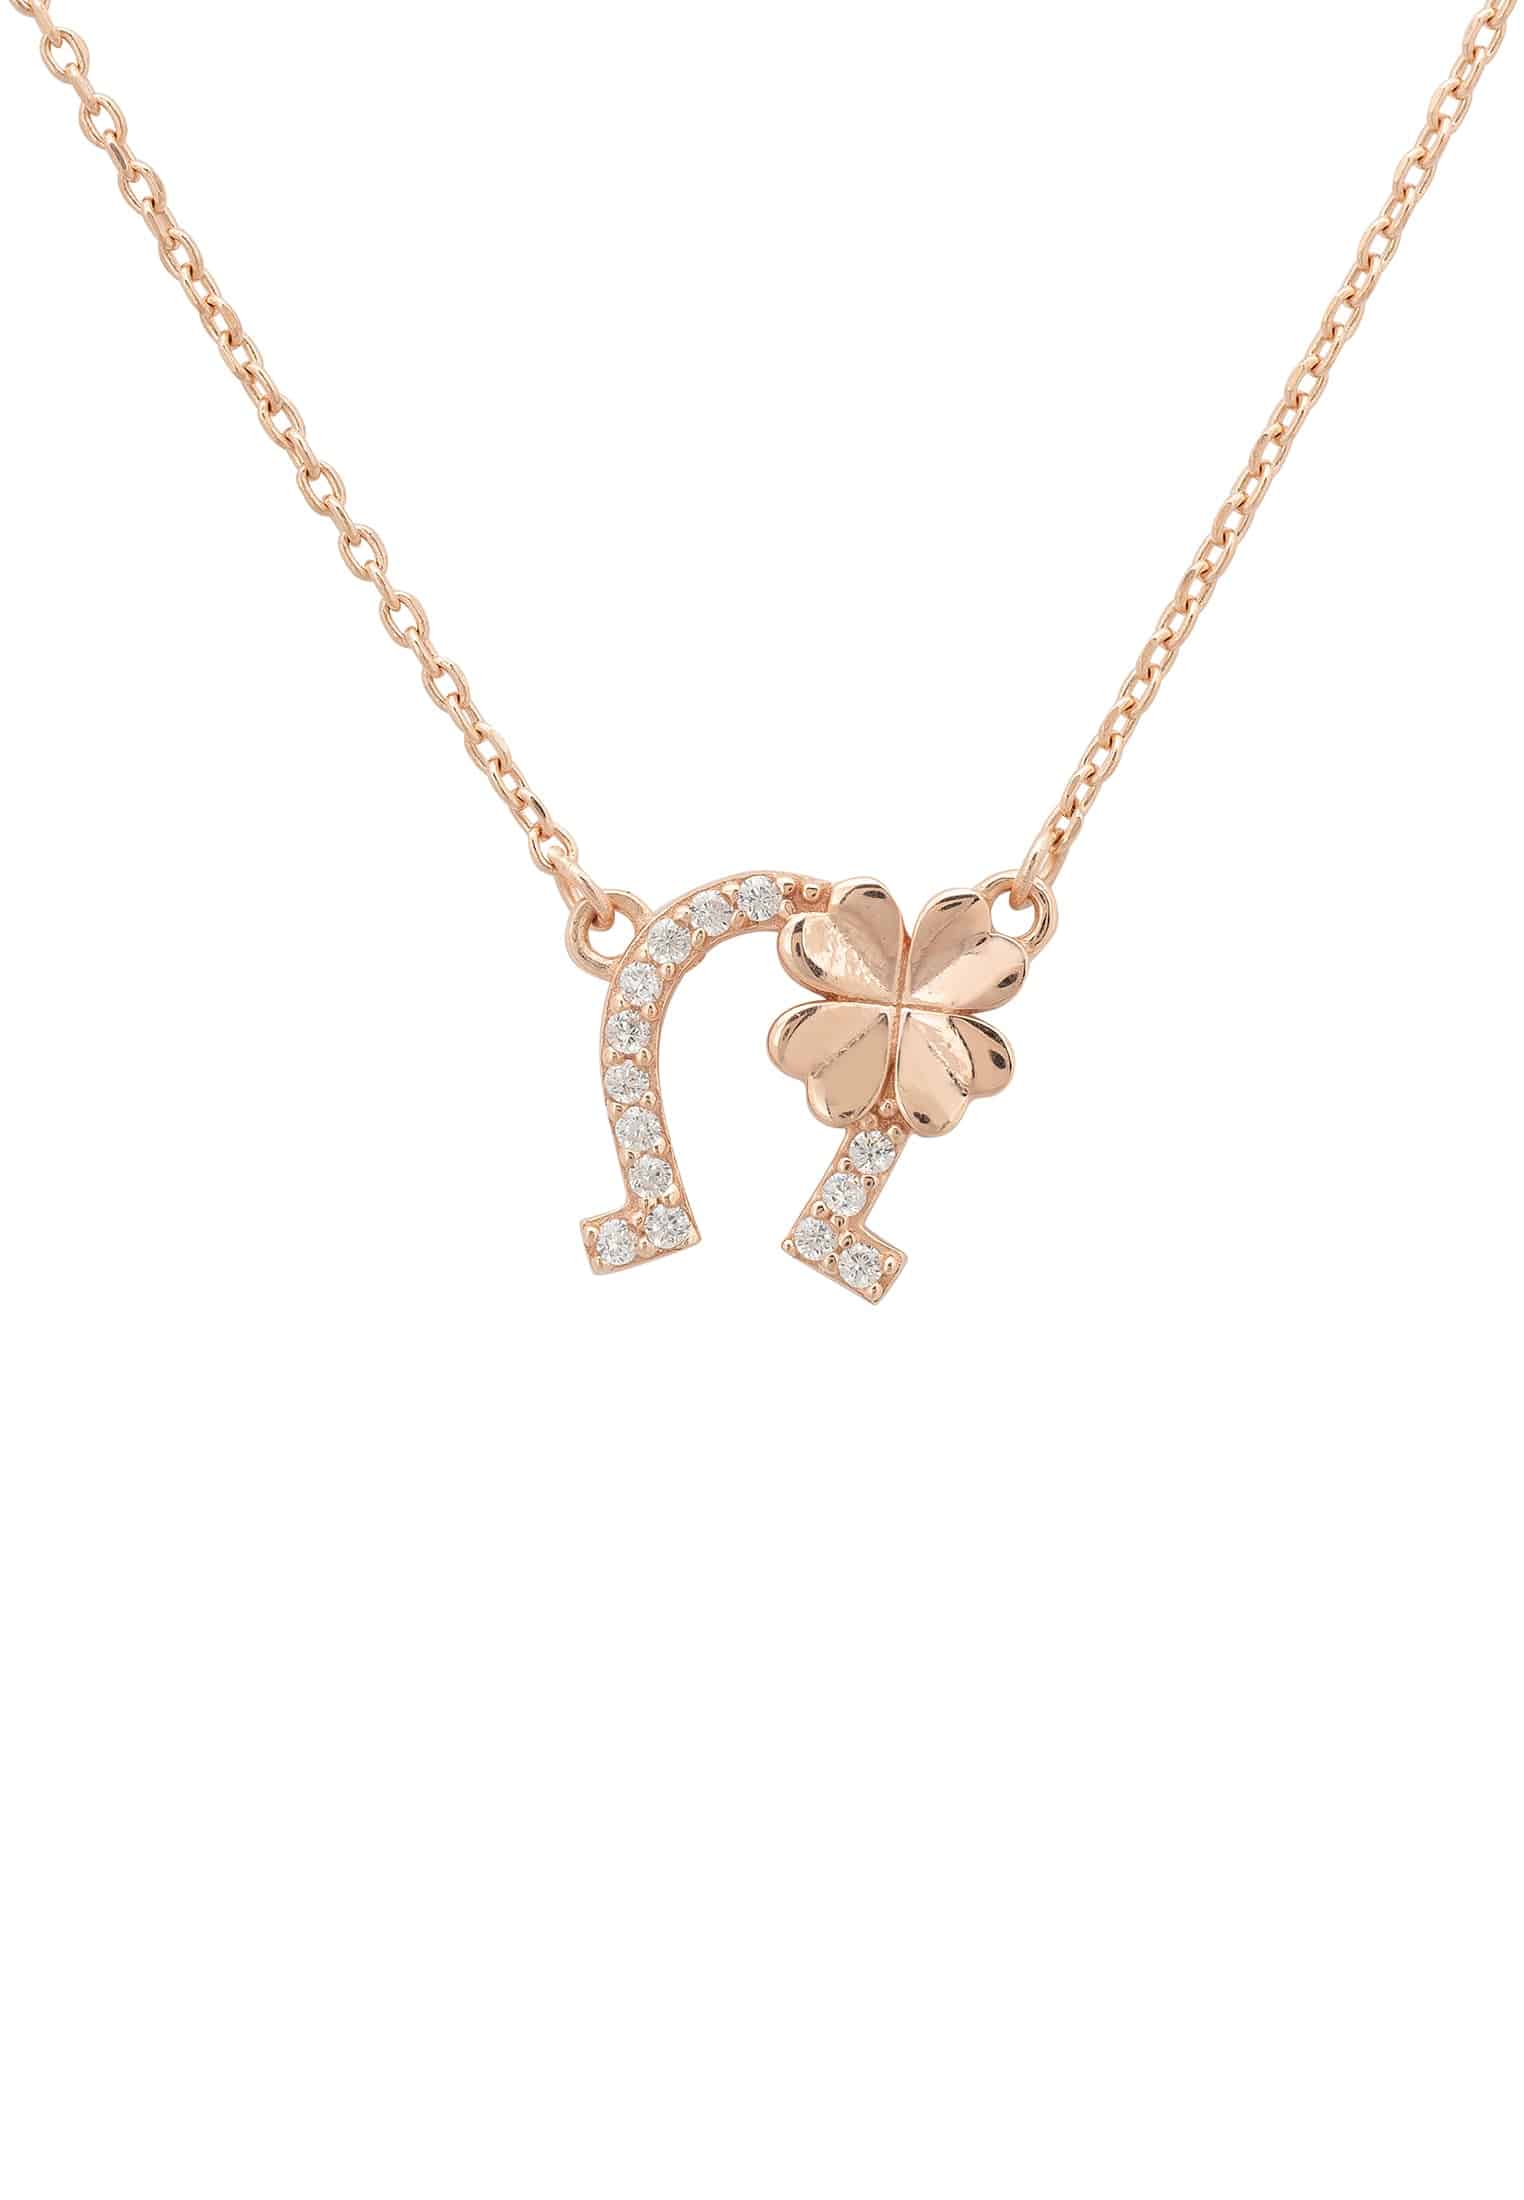 Rosegold Horseshoe and Shamrock Necklace with White Zirconia - Handcrafted Sterling Silver Talisman Jewelry - Jewelry & Watches - Bijou Her -  -  - 